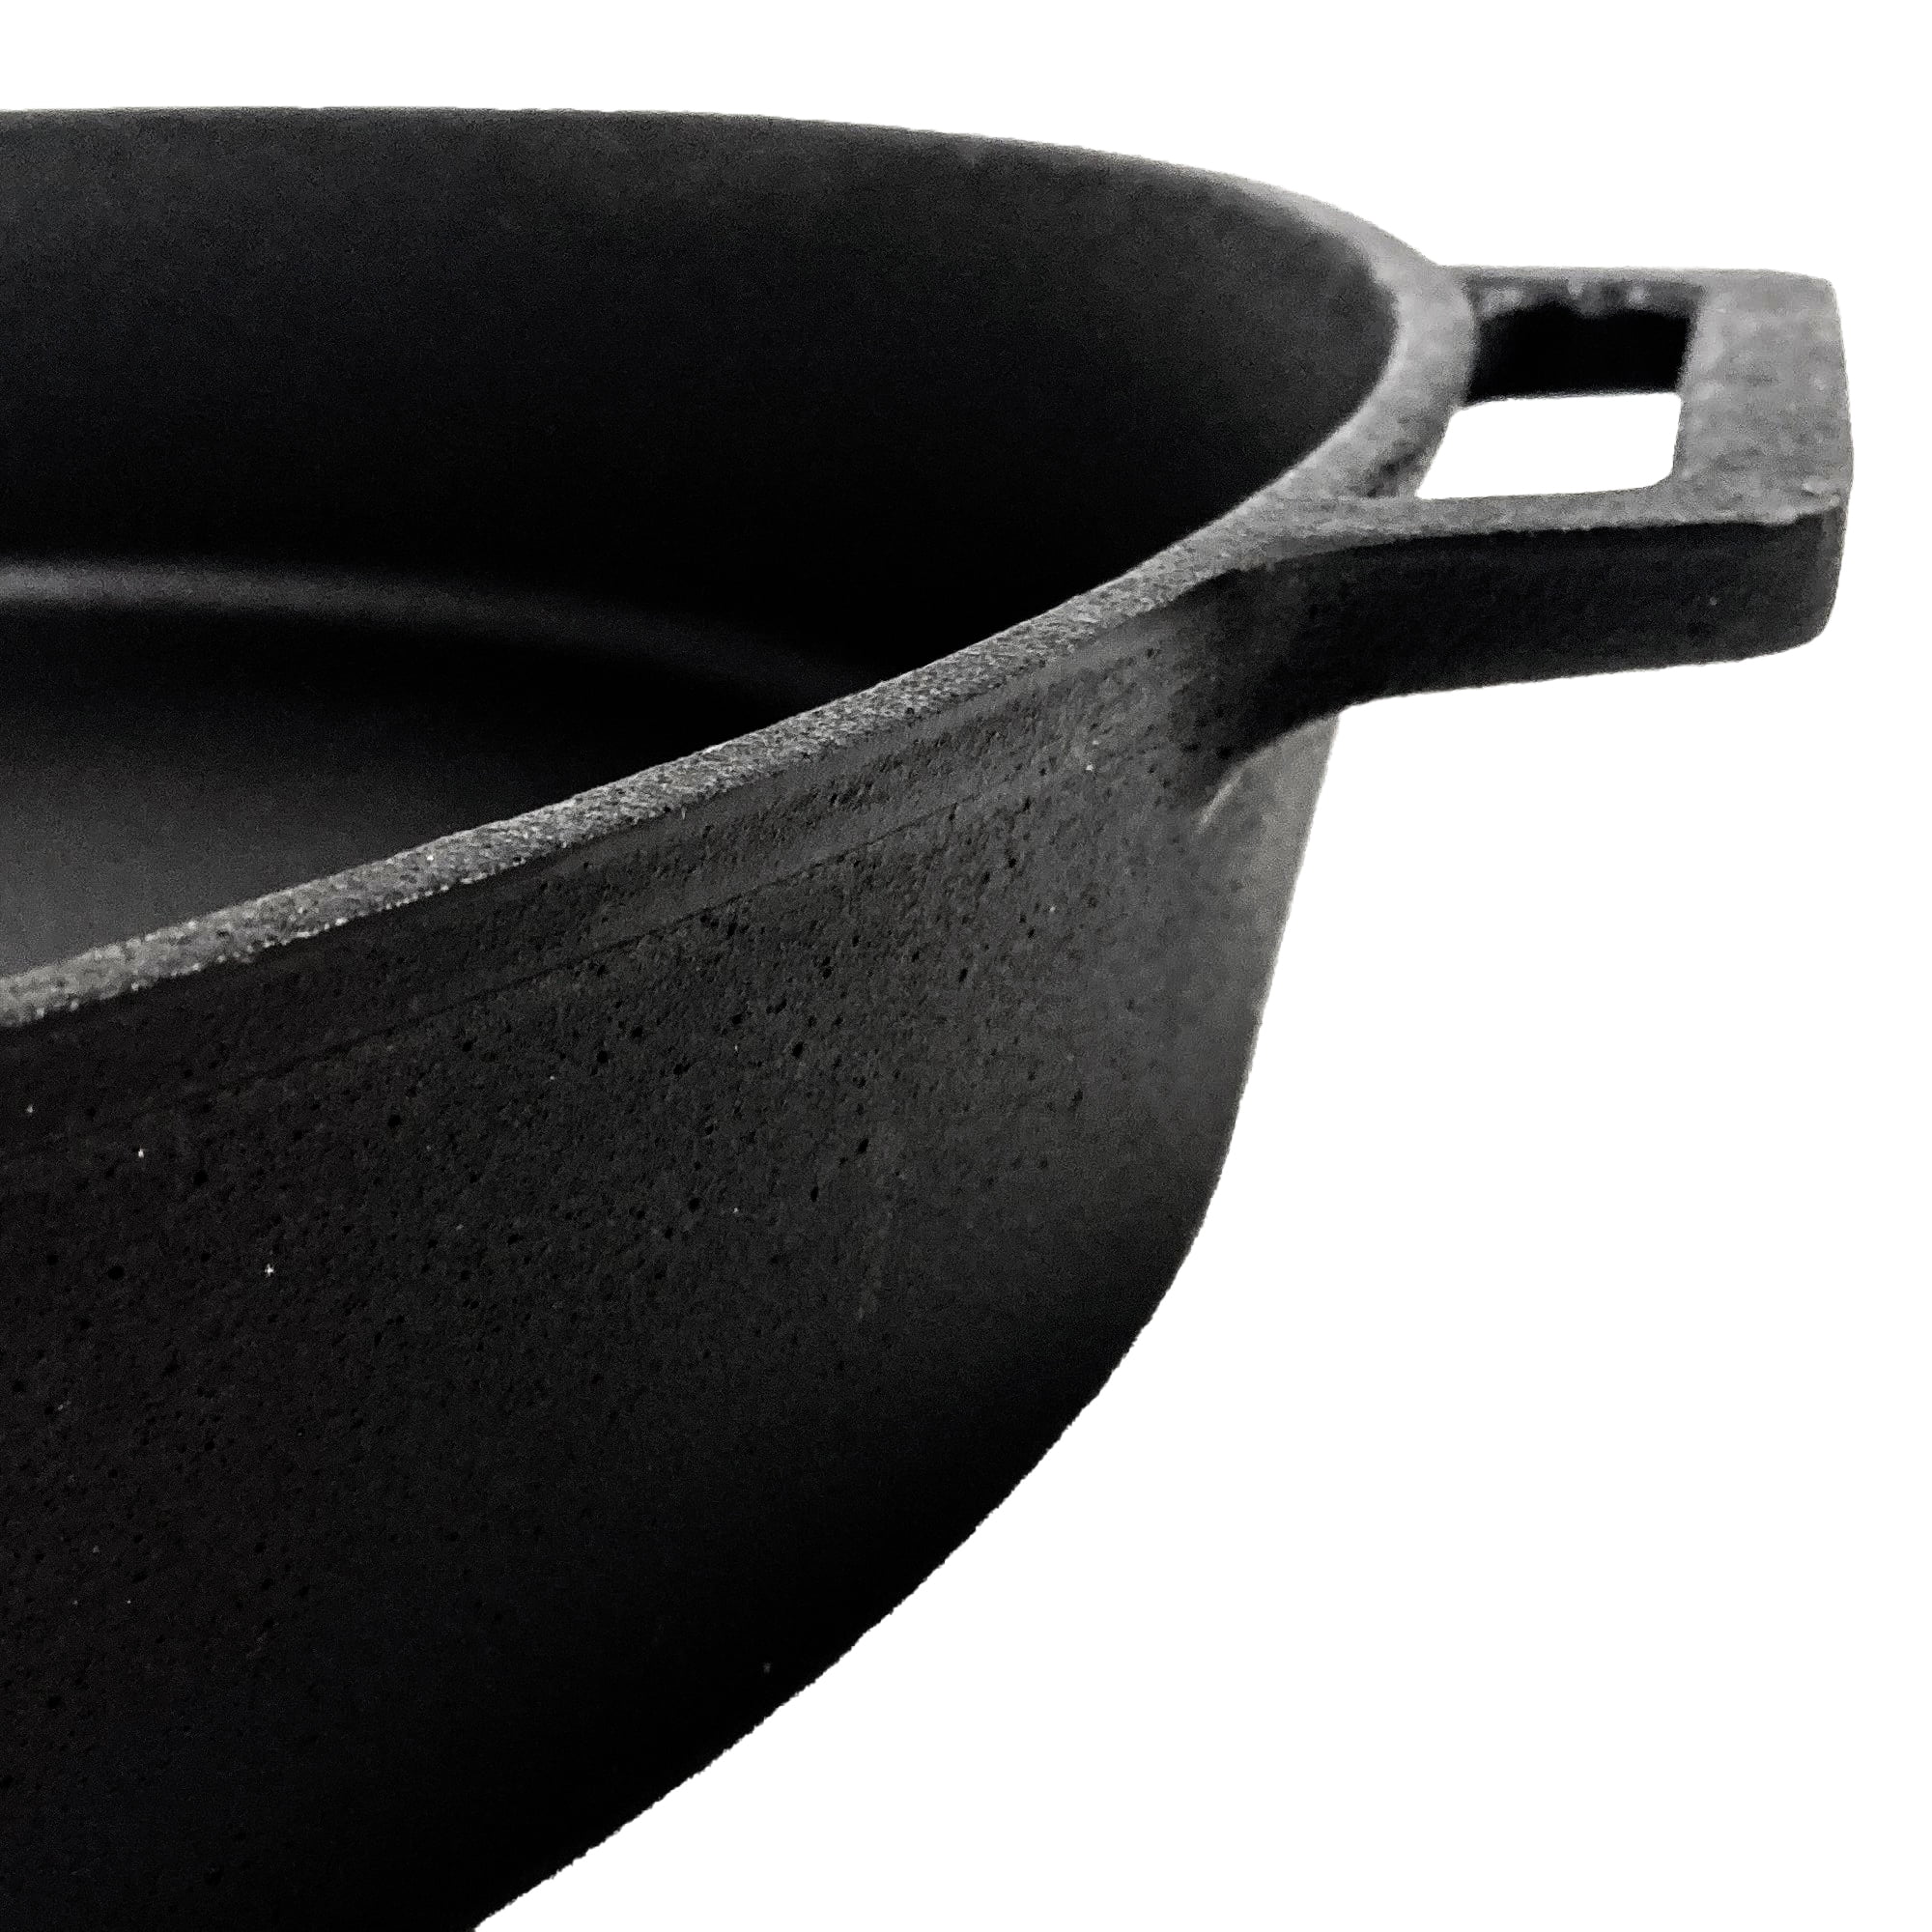  Bayou Classic 20 Inch Jumbo Cast Iron Skillet Features Dual  Helper Handles Deep 3-in Sides Perfect For Breakfast Roast Pan Frying  Sautéing Baking & Large Batch Cooking : Cast Iron